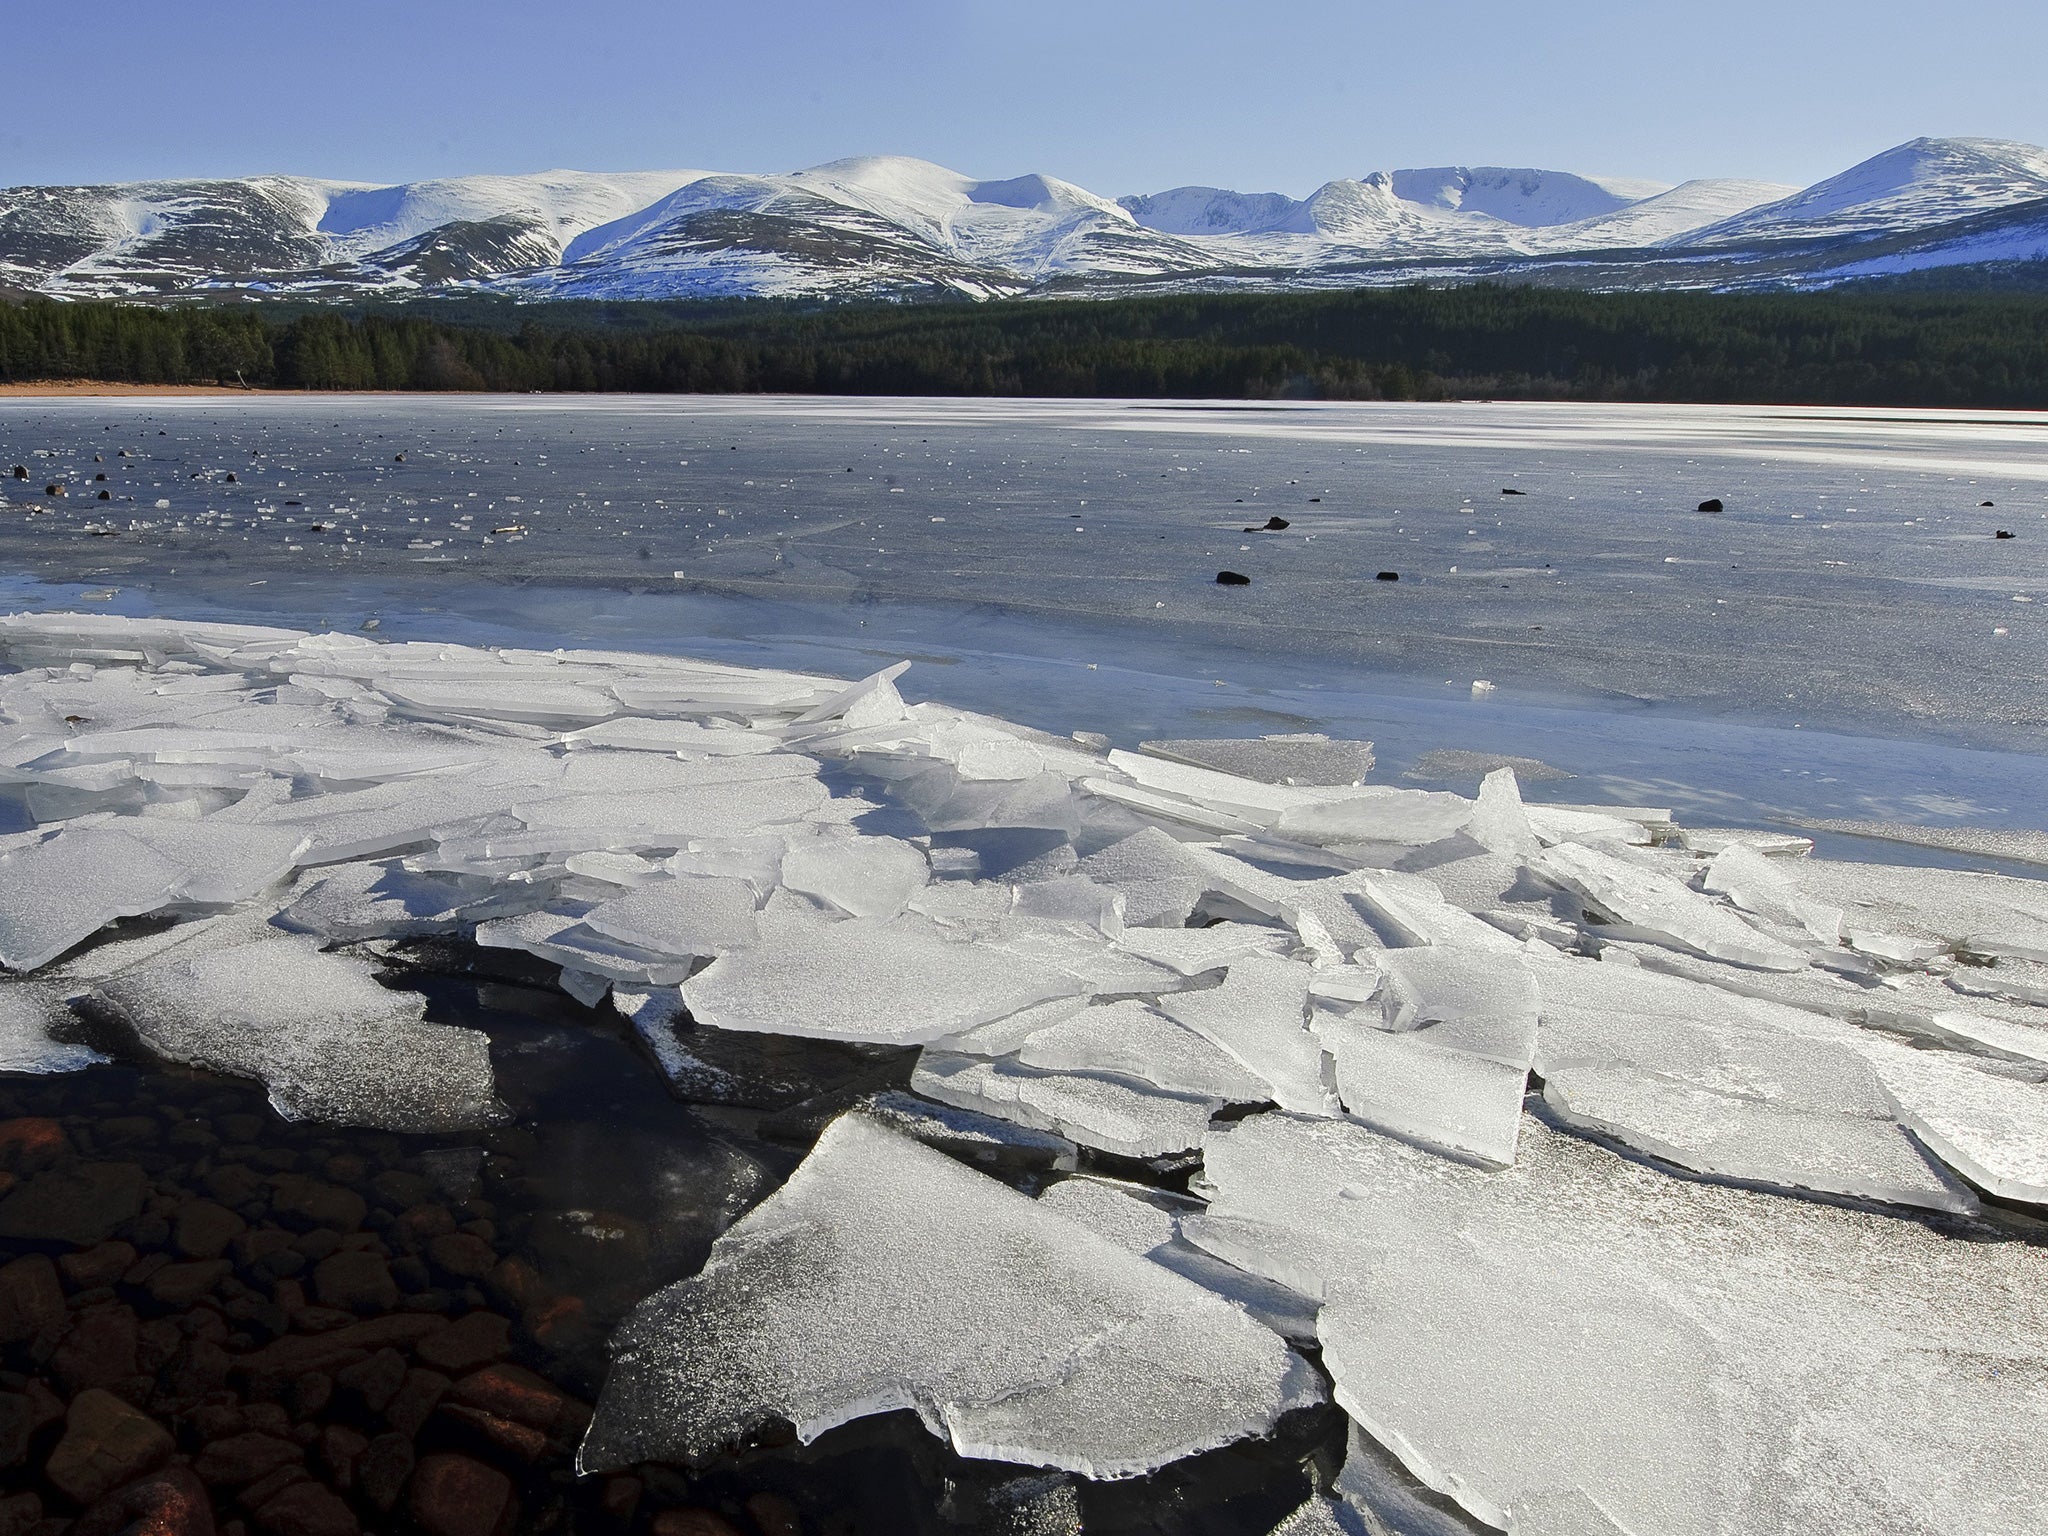 Frozen water around the Cairngorm mountains in the Highlands